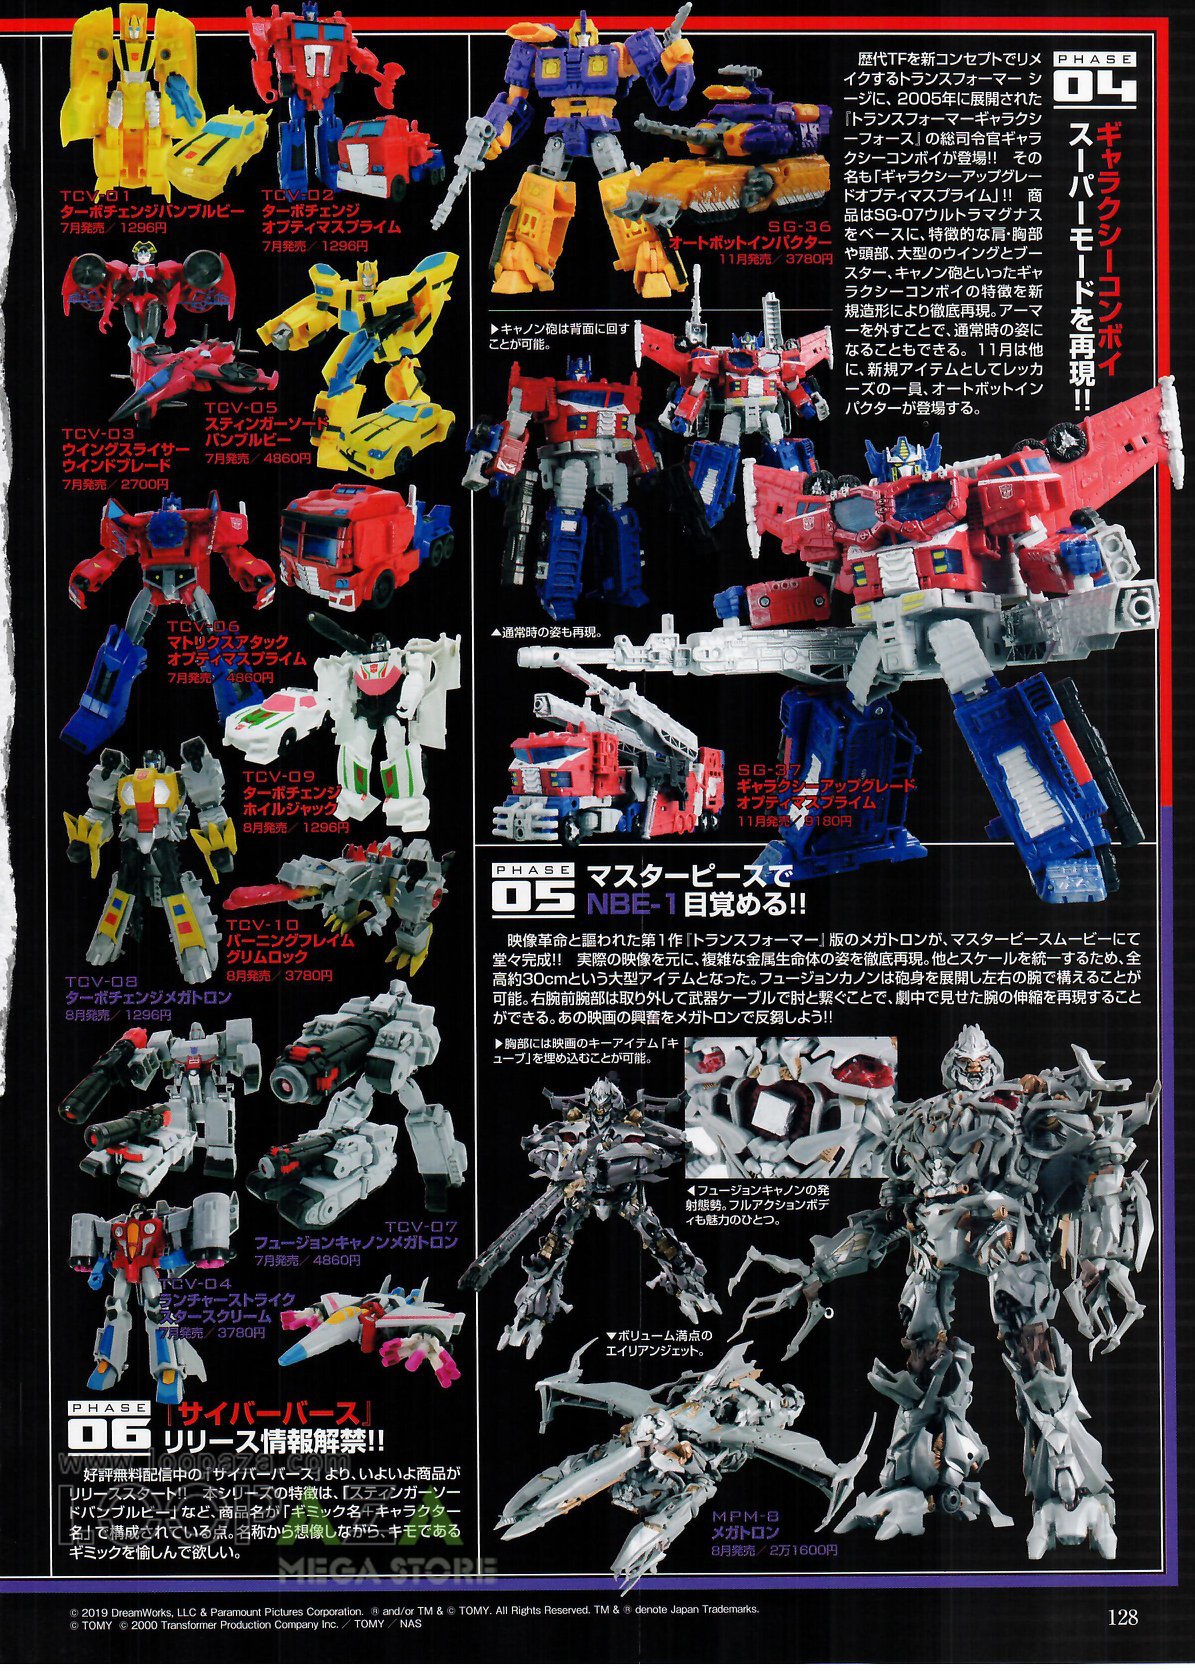 Tfsource Toy Store New Figure Kings Scans Featuring Transformers Masterpiece Mp 47 Hound Studio Series Masterpiece Movie Mpm 08 Megatron Transformers Cyberverse War For Cybertron Siege Omega Supreme Beast Wars